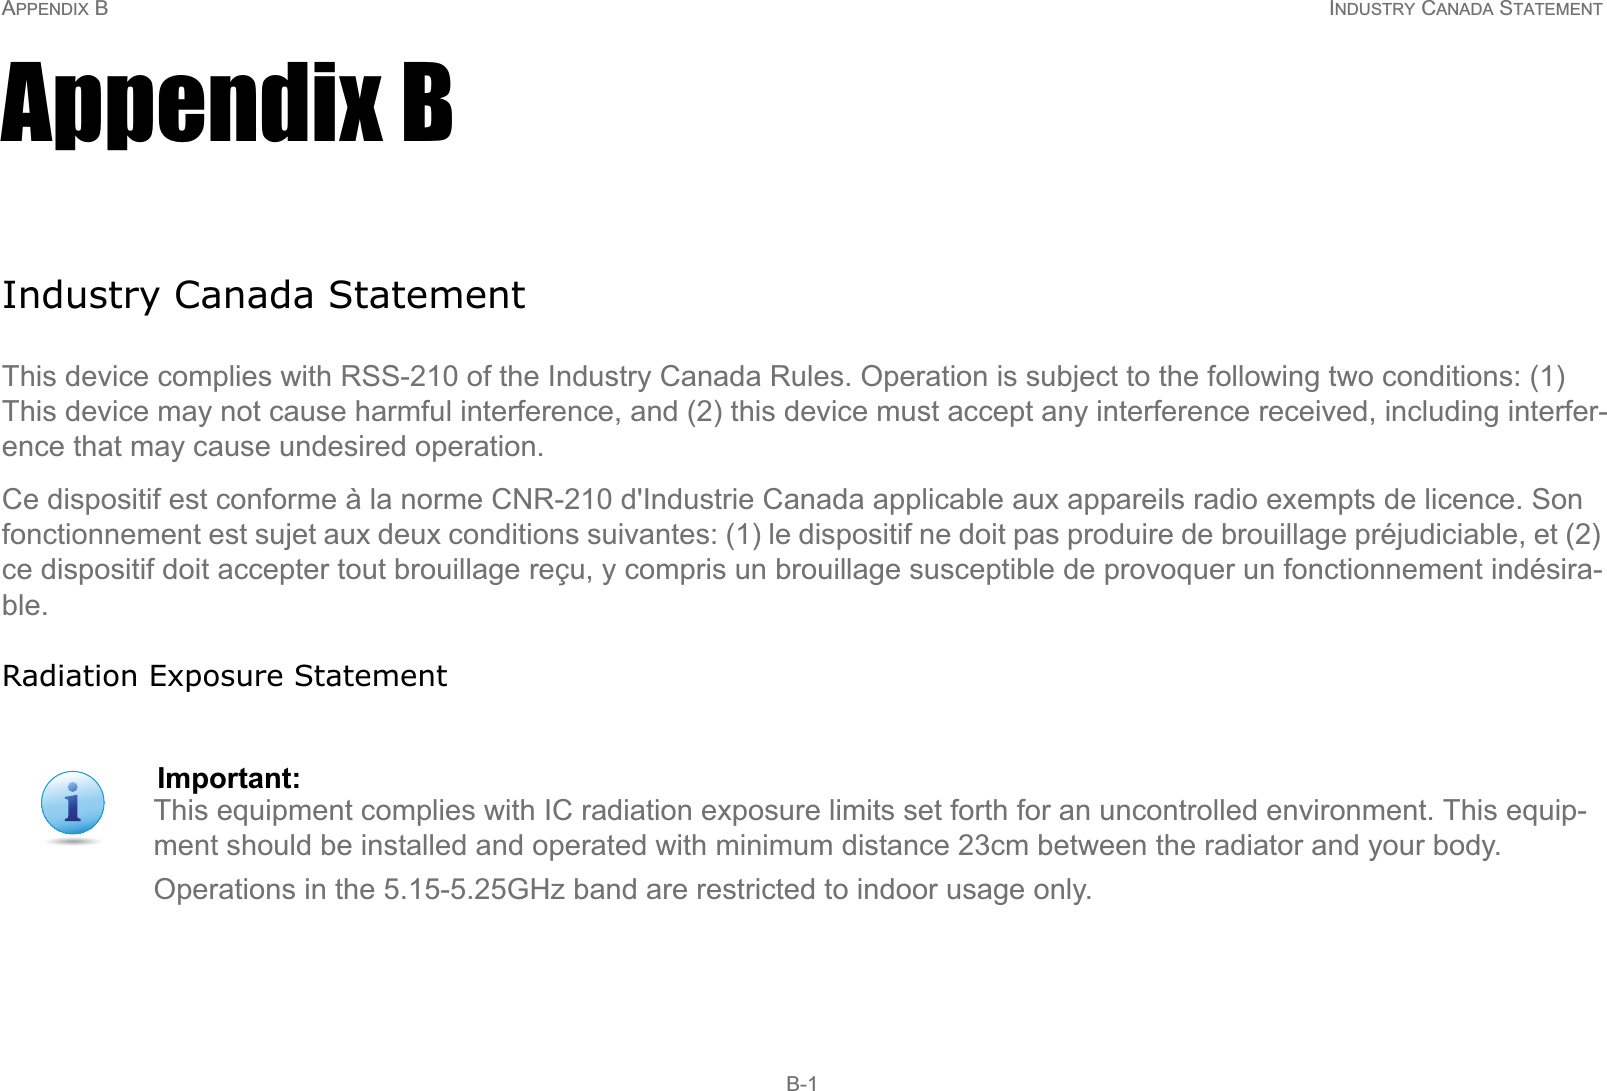 APPENDIX B INDUSTRY CANADA STATEMENT B-1Appendix BIndustry Canada StatementThis device complies with RSS-210 of the Industry Canada Rules. Operation is subject to the following two conditions: (1) This device may not cause harmful interference, and (2) this device must accept any interference received, including interfer-ence that may cause undesired operation.Ce dispositif est conforme à la norme CNR-210 d&apos;Industrie Canada applicable aux appareils radio exempts de licence. Son fonctionnement est sujet aux deux conditions suivantes: (1) le dispositif ne doit pas produire de brouillage préjudiciable, et (2) ce dispositif doit accepter tout brouillage reçu, y compris un brouillage susceptible de provoquer un fonctionnement indésira-ble.Radiation Exposure StatementImportant:This equipment complies with IC radiation exposure limits set forth for an uncontrolled environment. This equip-ment should be installed and operated with minimum distance 23cm between the radiator and your body.Operations in the 5.15-5.25GHz band are restricted to indoor usage only.